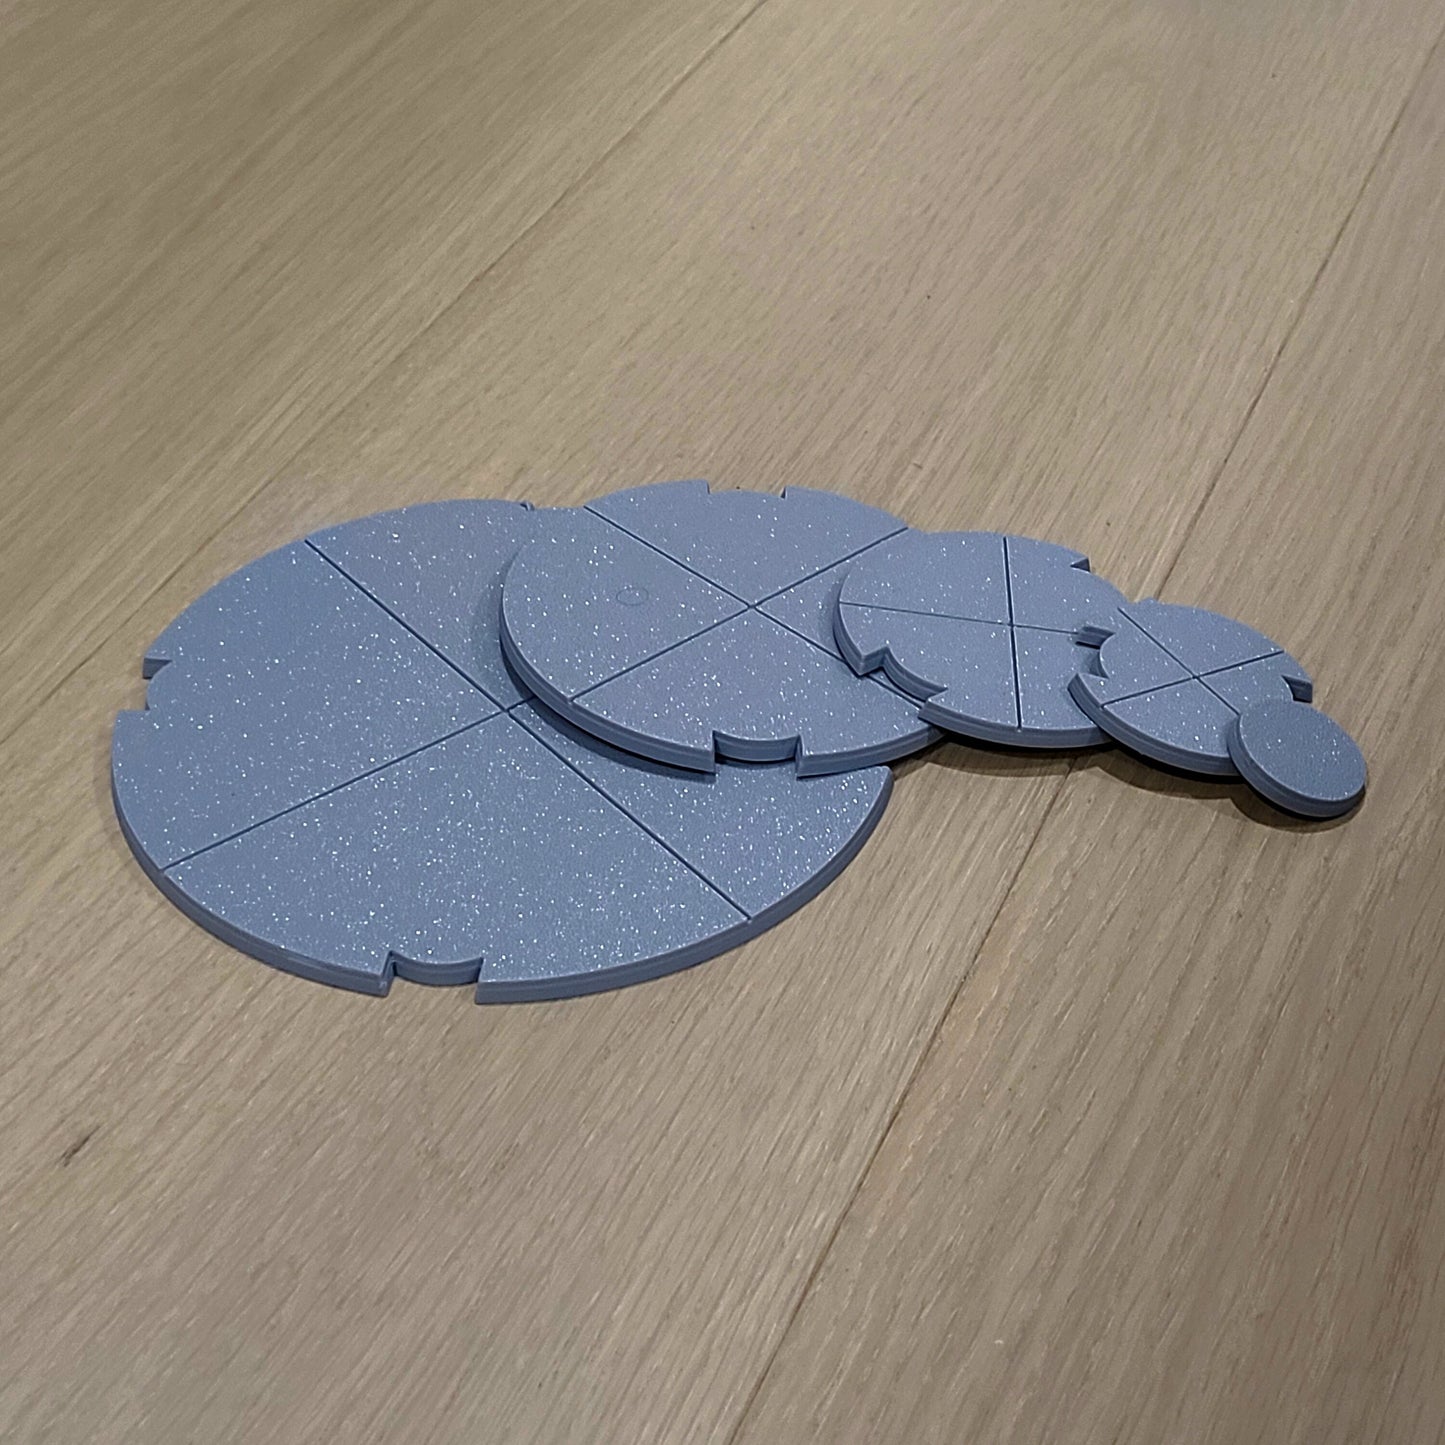 SW Legion compatible bases - 3D printed - Science Fiction RPG Bases